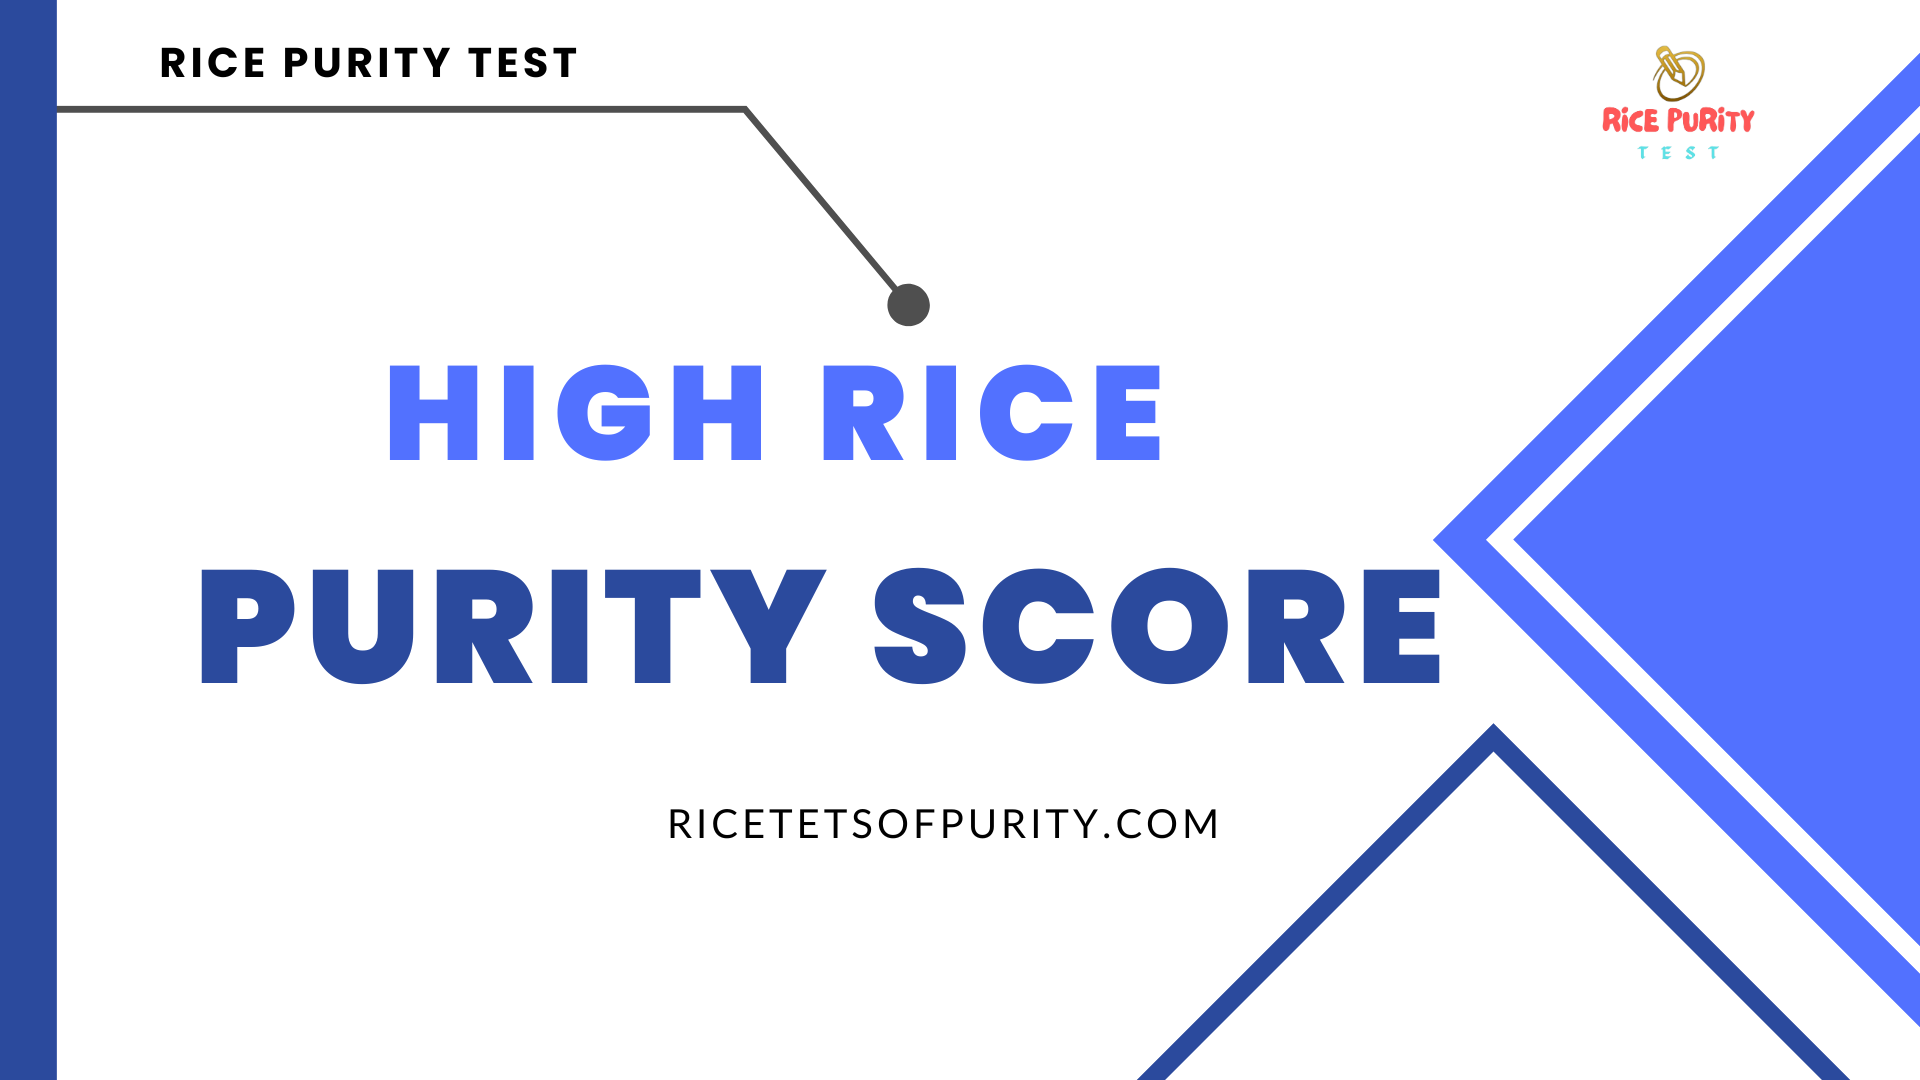 Whats a High Rice Purity Score and Why It Matters